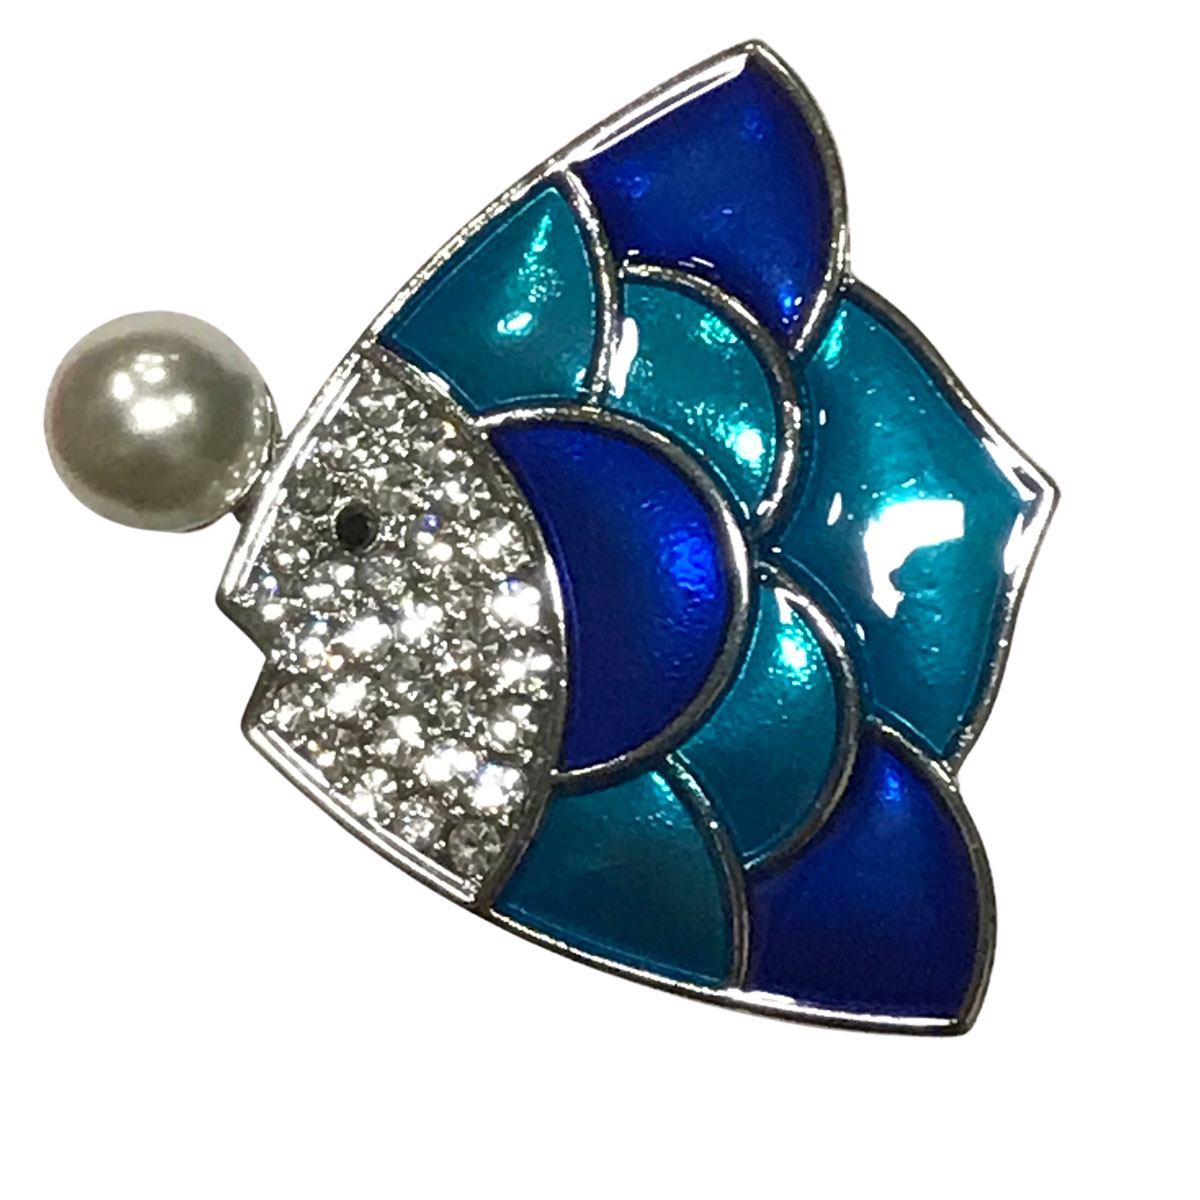 2997 - Artful Design Magnetic Brooches 611 Aztec Circle with Turquoise Magnetic Brooch - 2